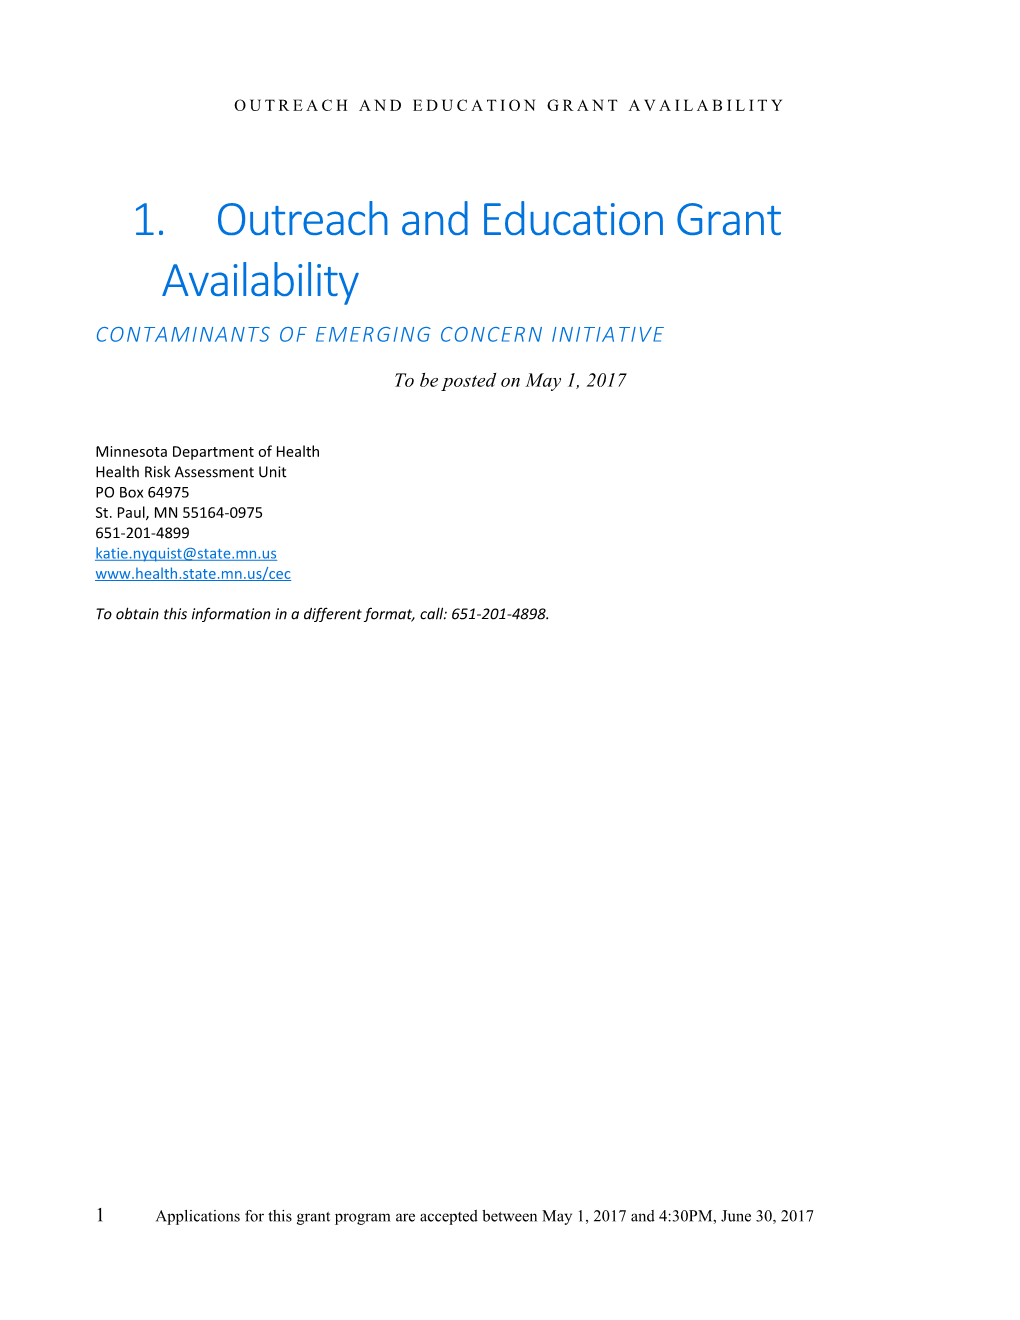 Outreach and Education Grant RFP